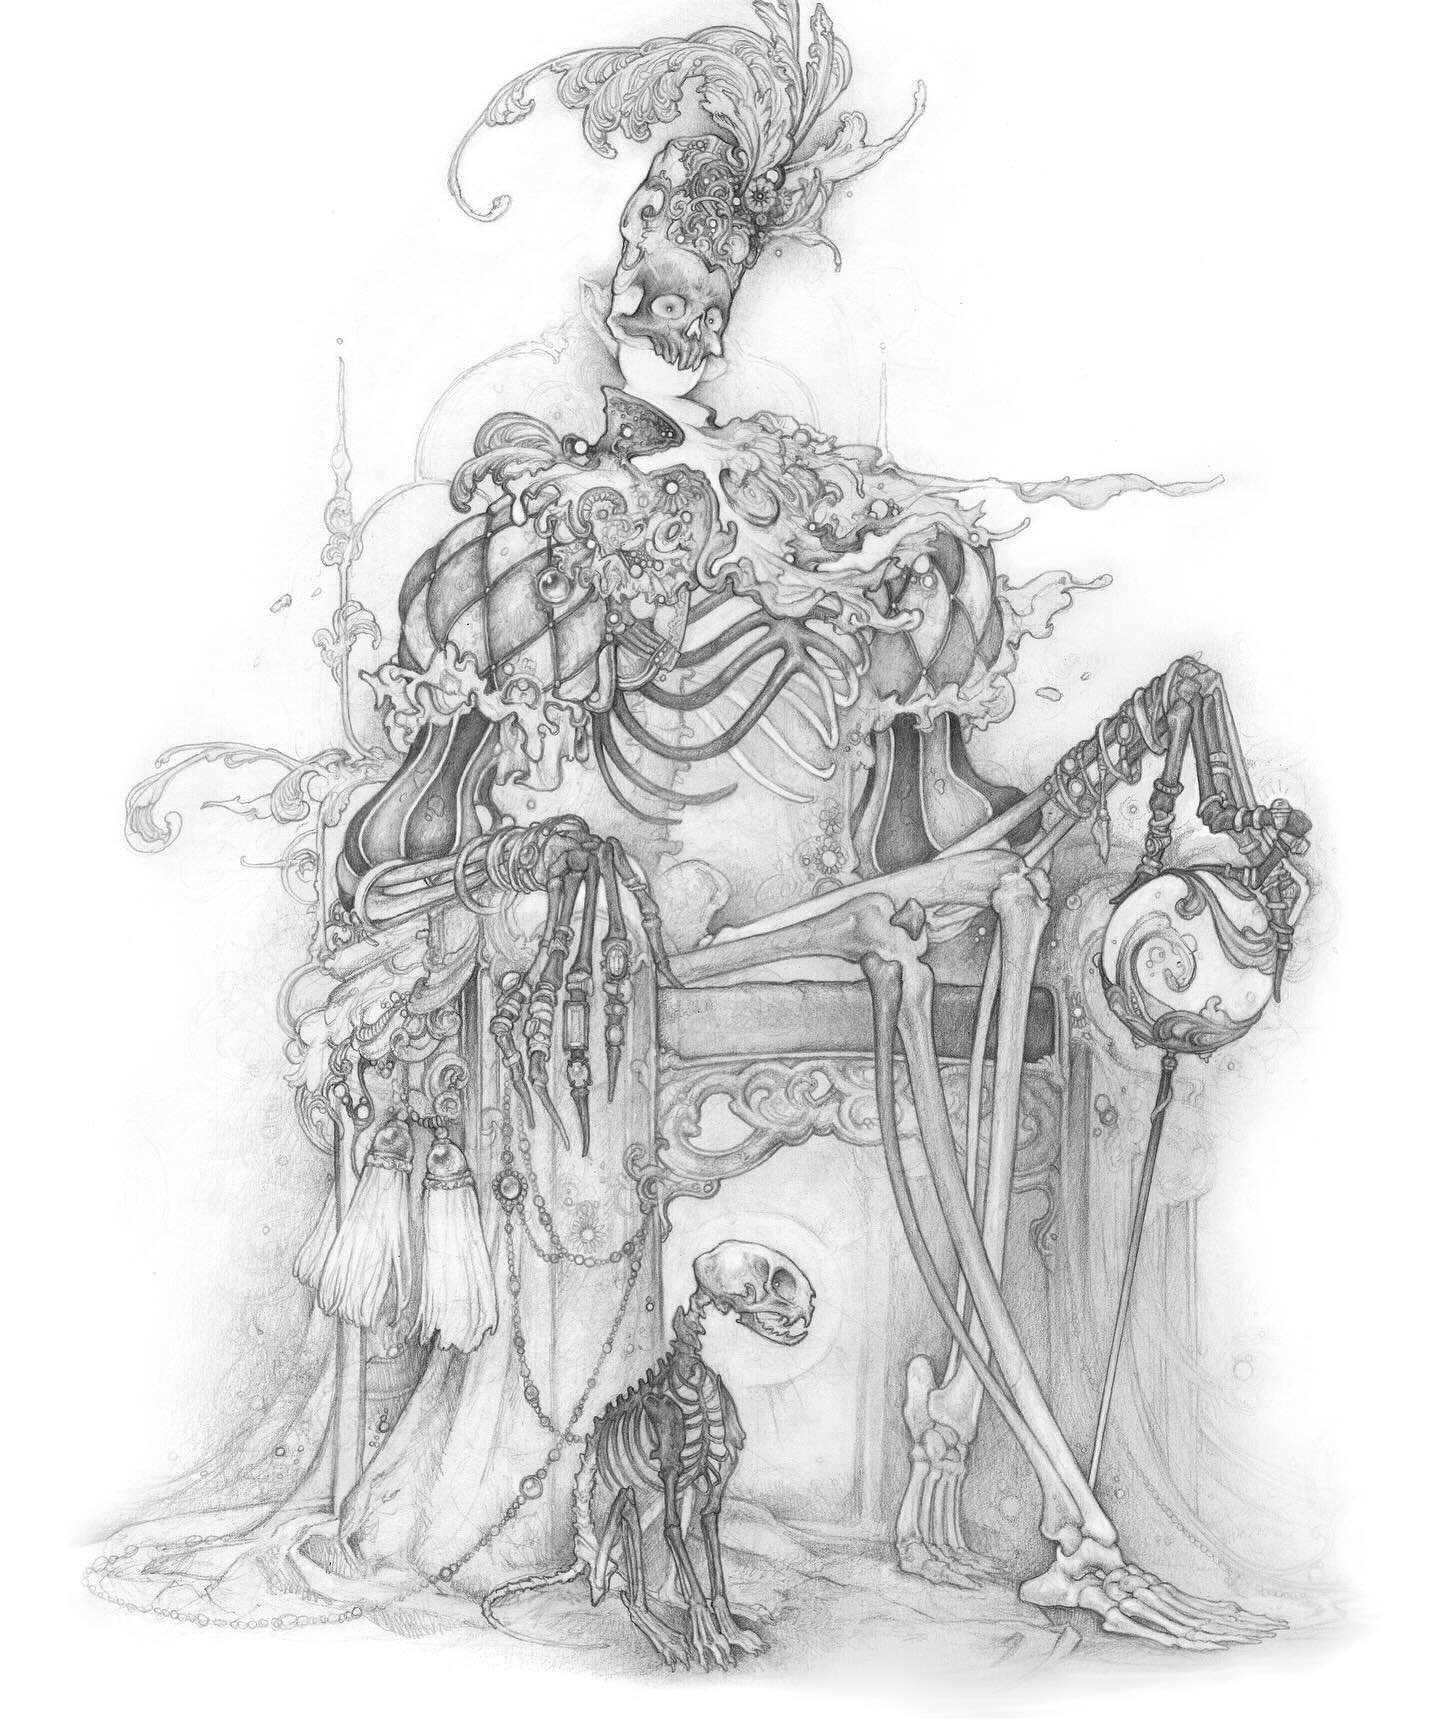 &quot;Magnificent, Even in Death&quot; 💀

First official pencil drawing of 2024! This was a fun distraction in between bigger projects. 
I&rsquo;ll be focused for the next two months on my massive 400 page art book that will be coming to Kickstarter